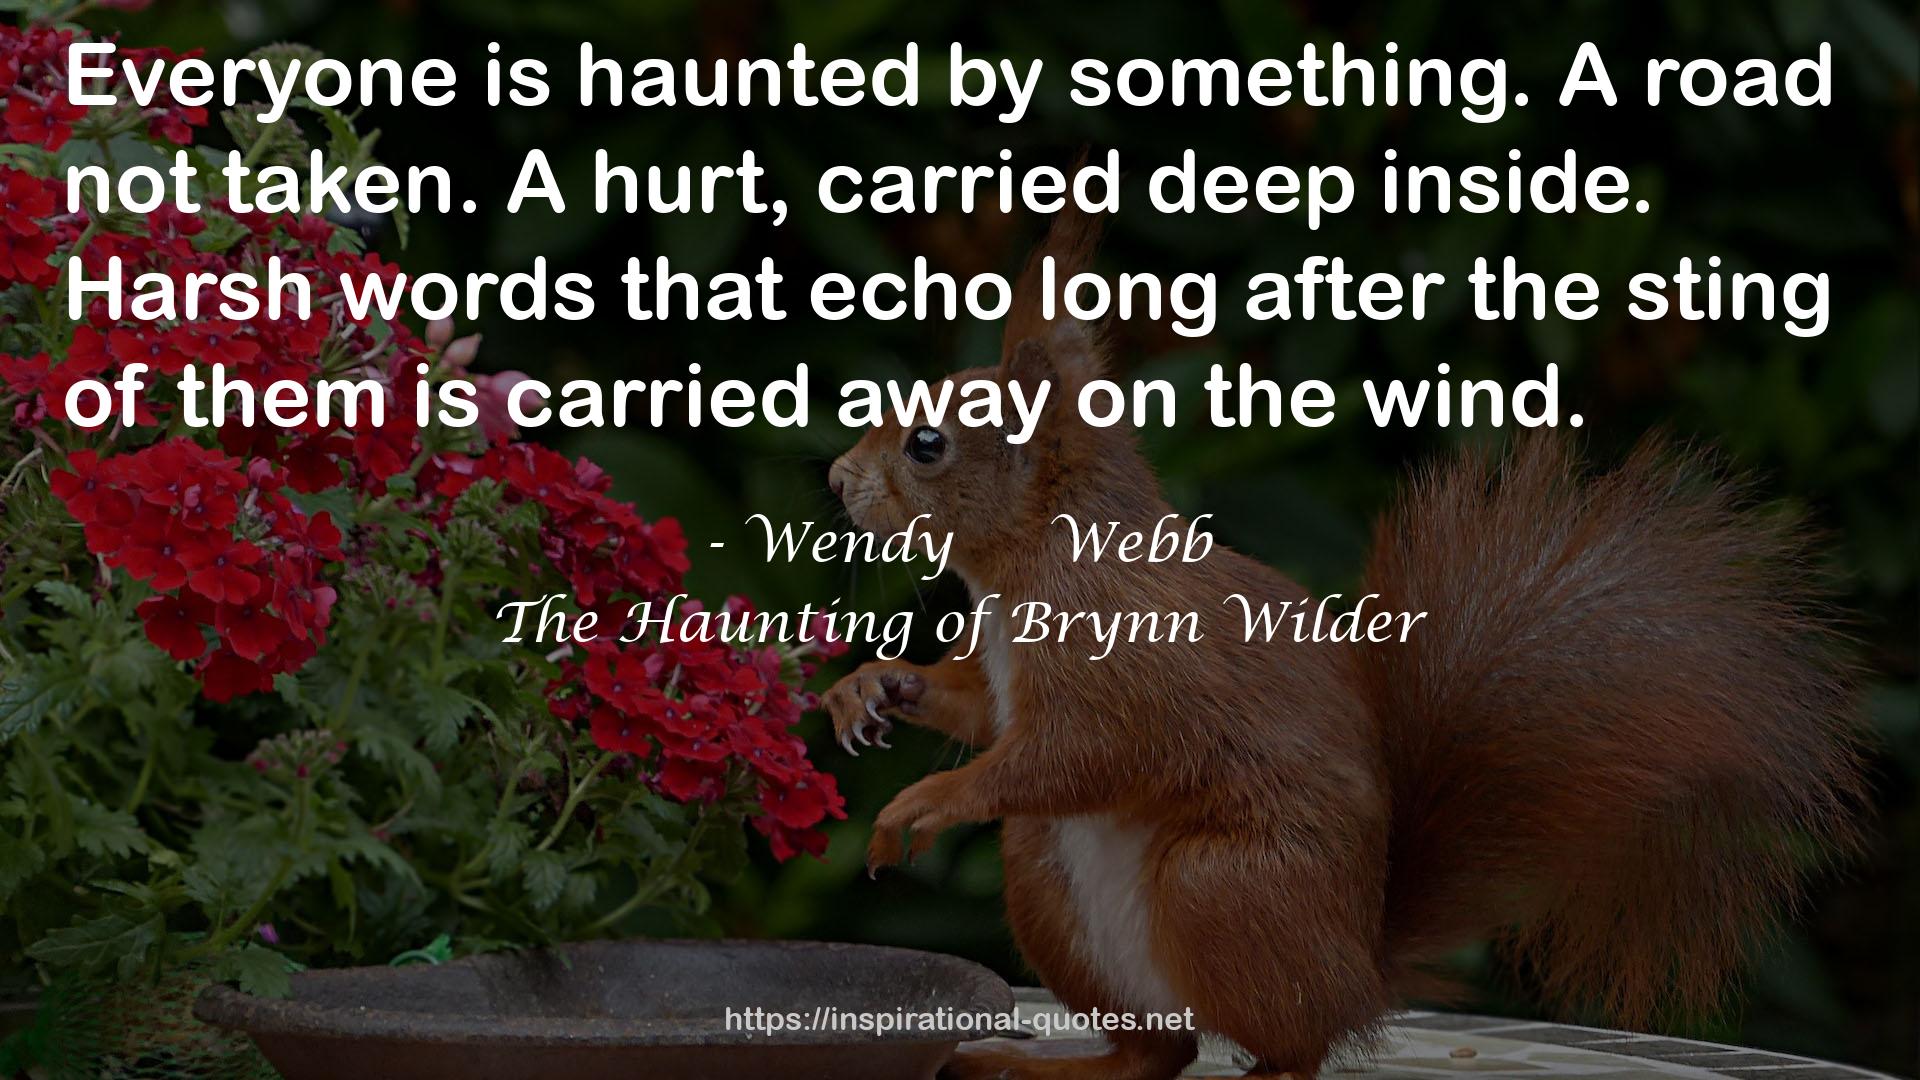 The Haunting of Brynn Wilder QUOTES